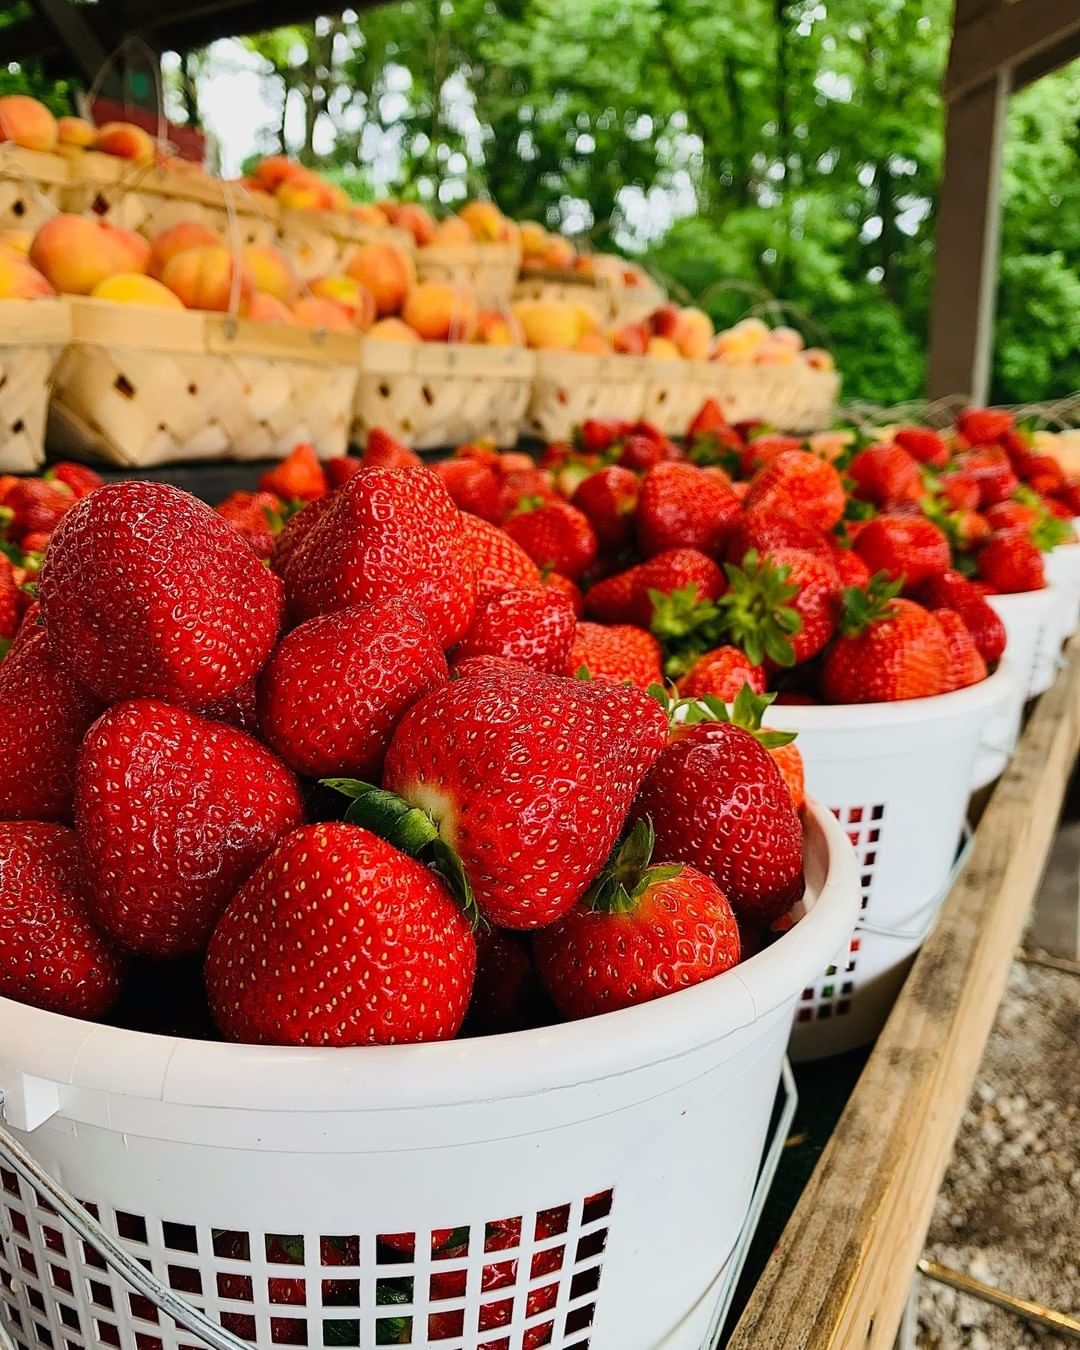 Baskets of strawberries at farmers markets.